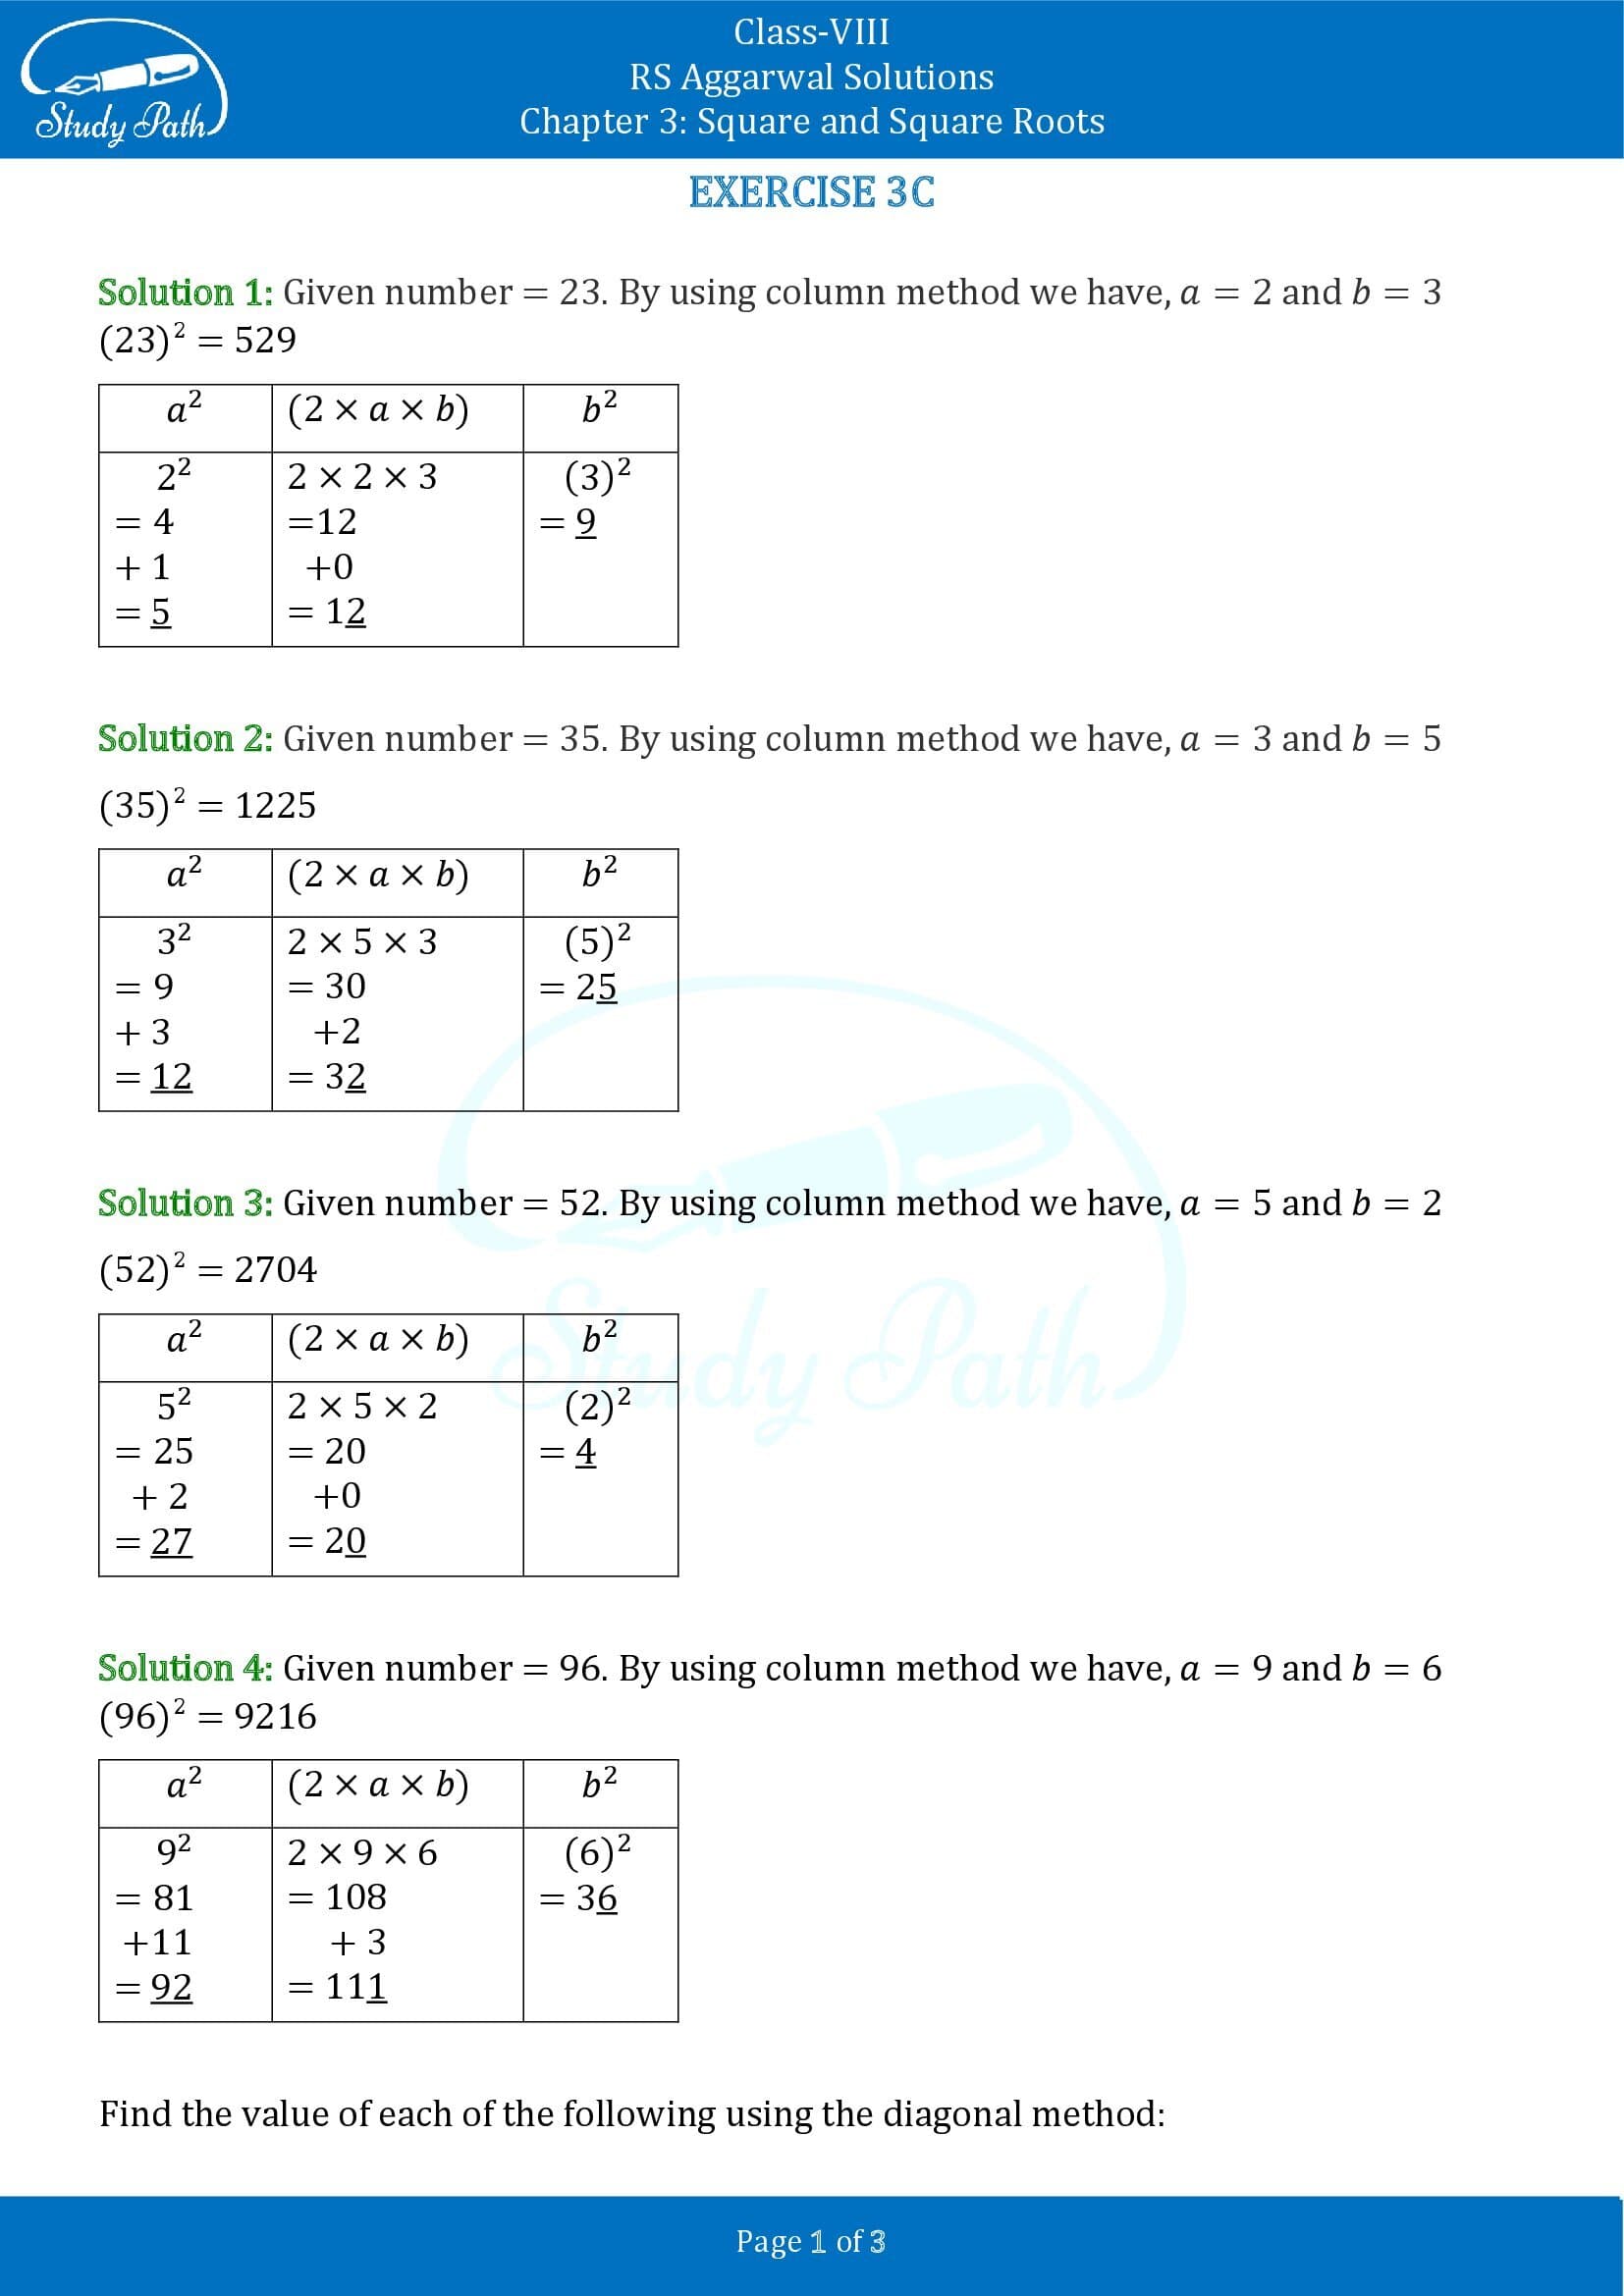 RS Aggarwal Solutions Class 8 Chapter 3 Square and Square Roots Exercise 3C 0001